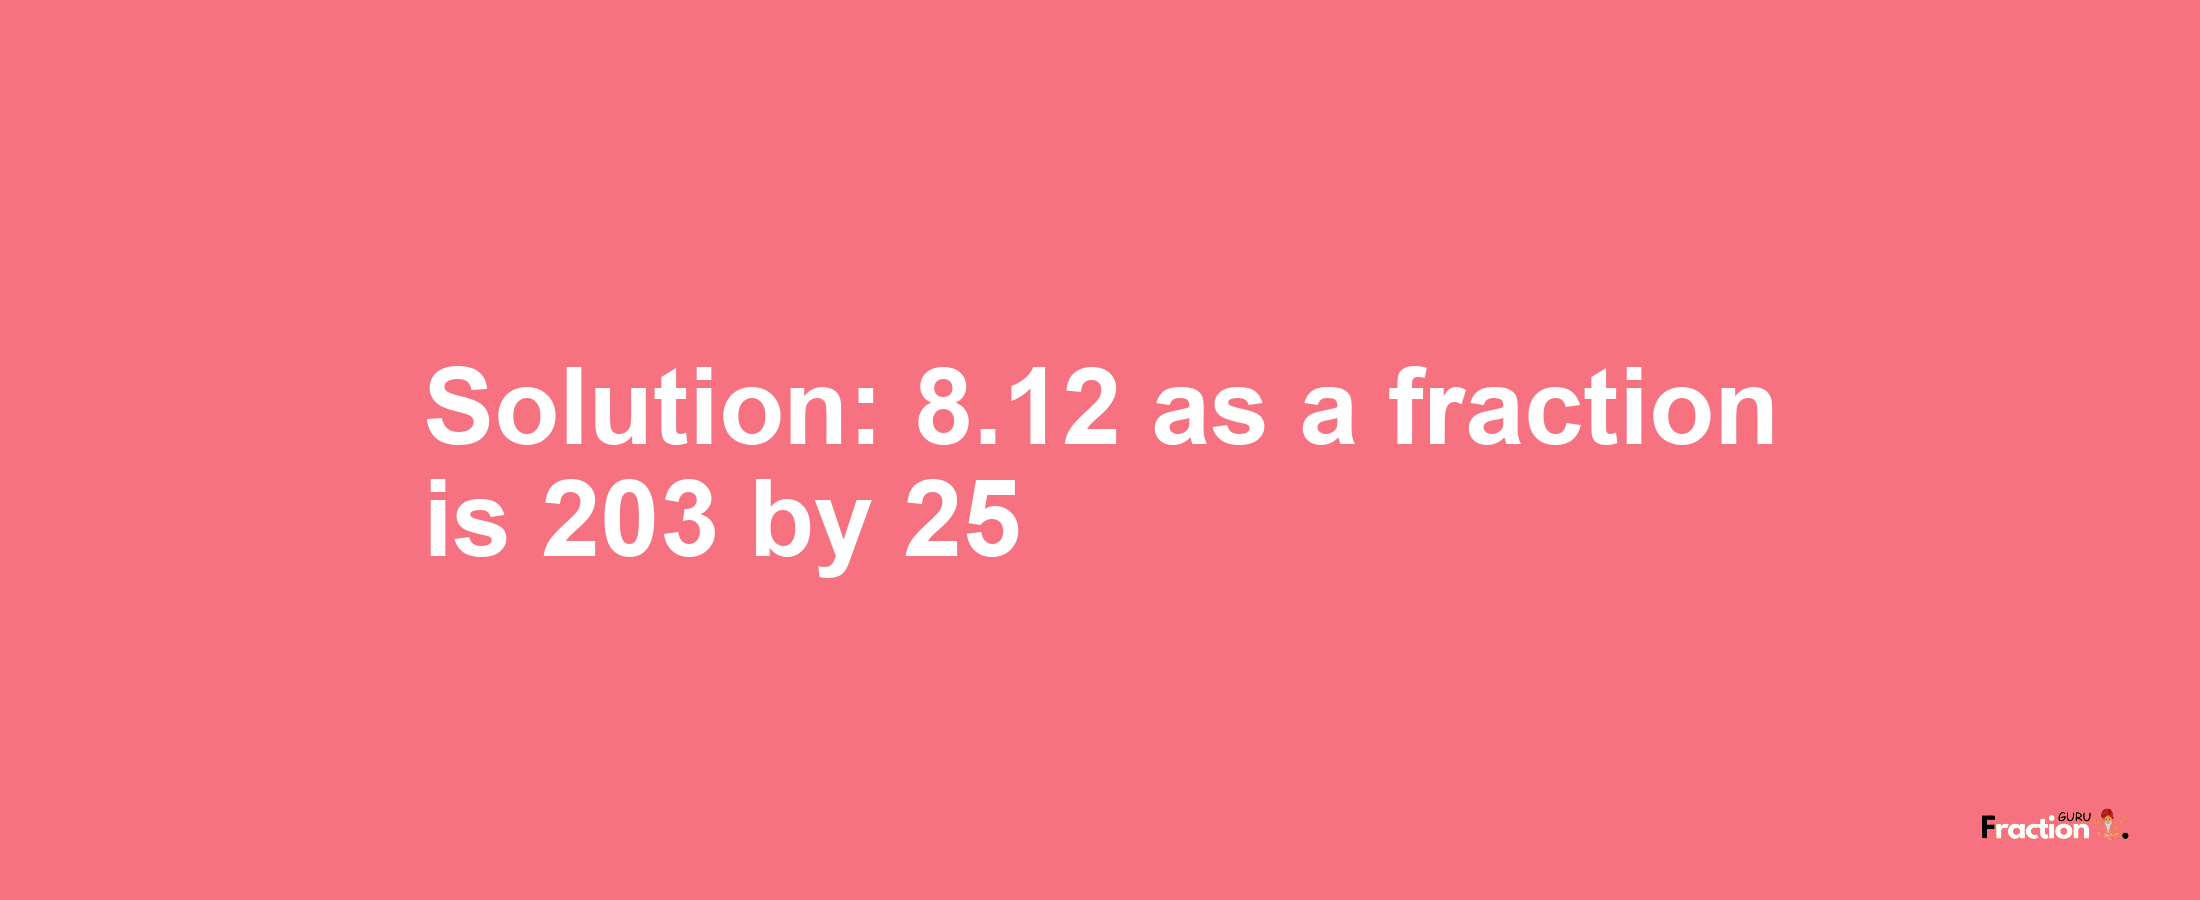 Solution:8.12 as a fraction is 203/25